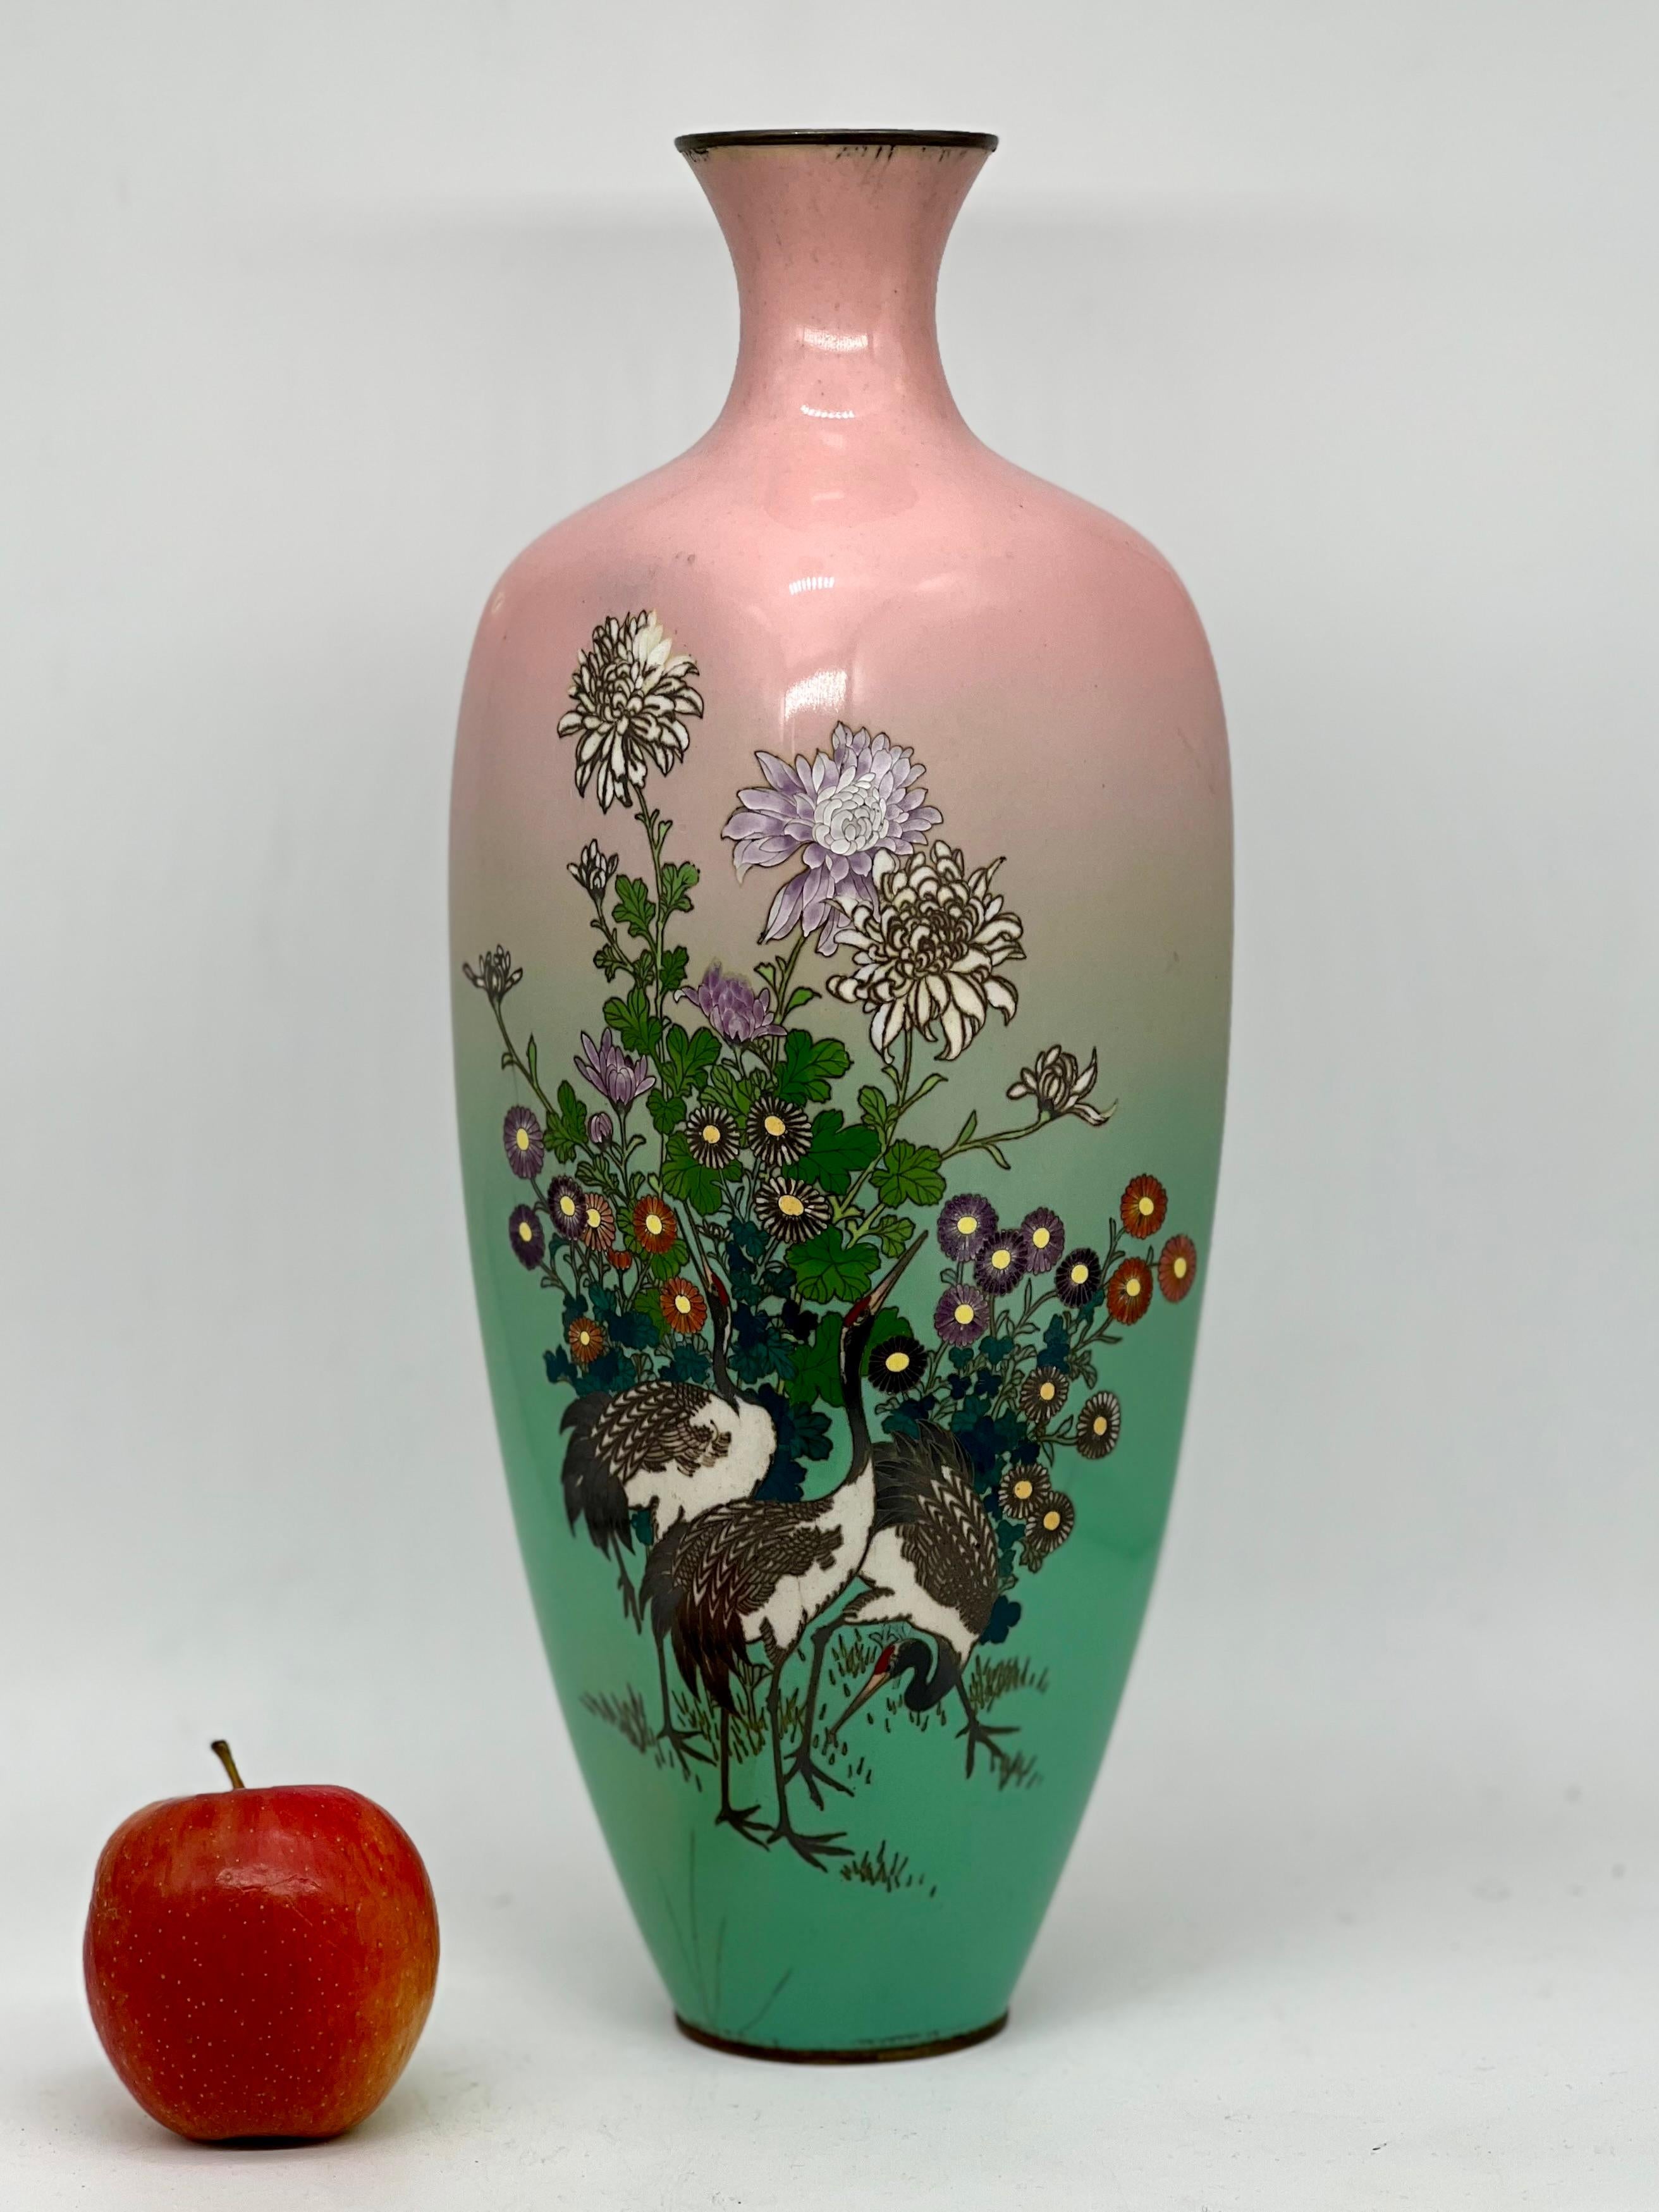 A magnificent Japanese Large Enamel Cloisonne vase of a elegant quadrilateral (square) form with slightly flared neck decorated with fine silver wire and polychrome enamels with three egrets, flowers and foliage reserved on a ground gradually